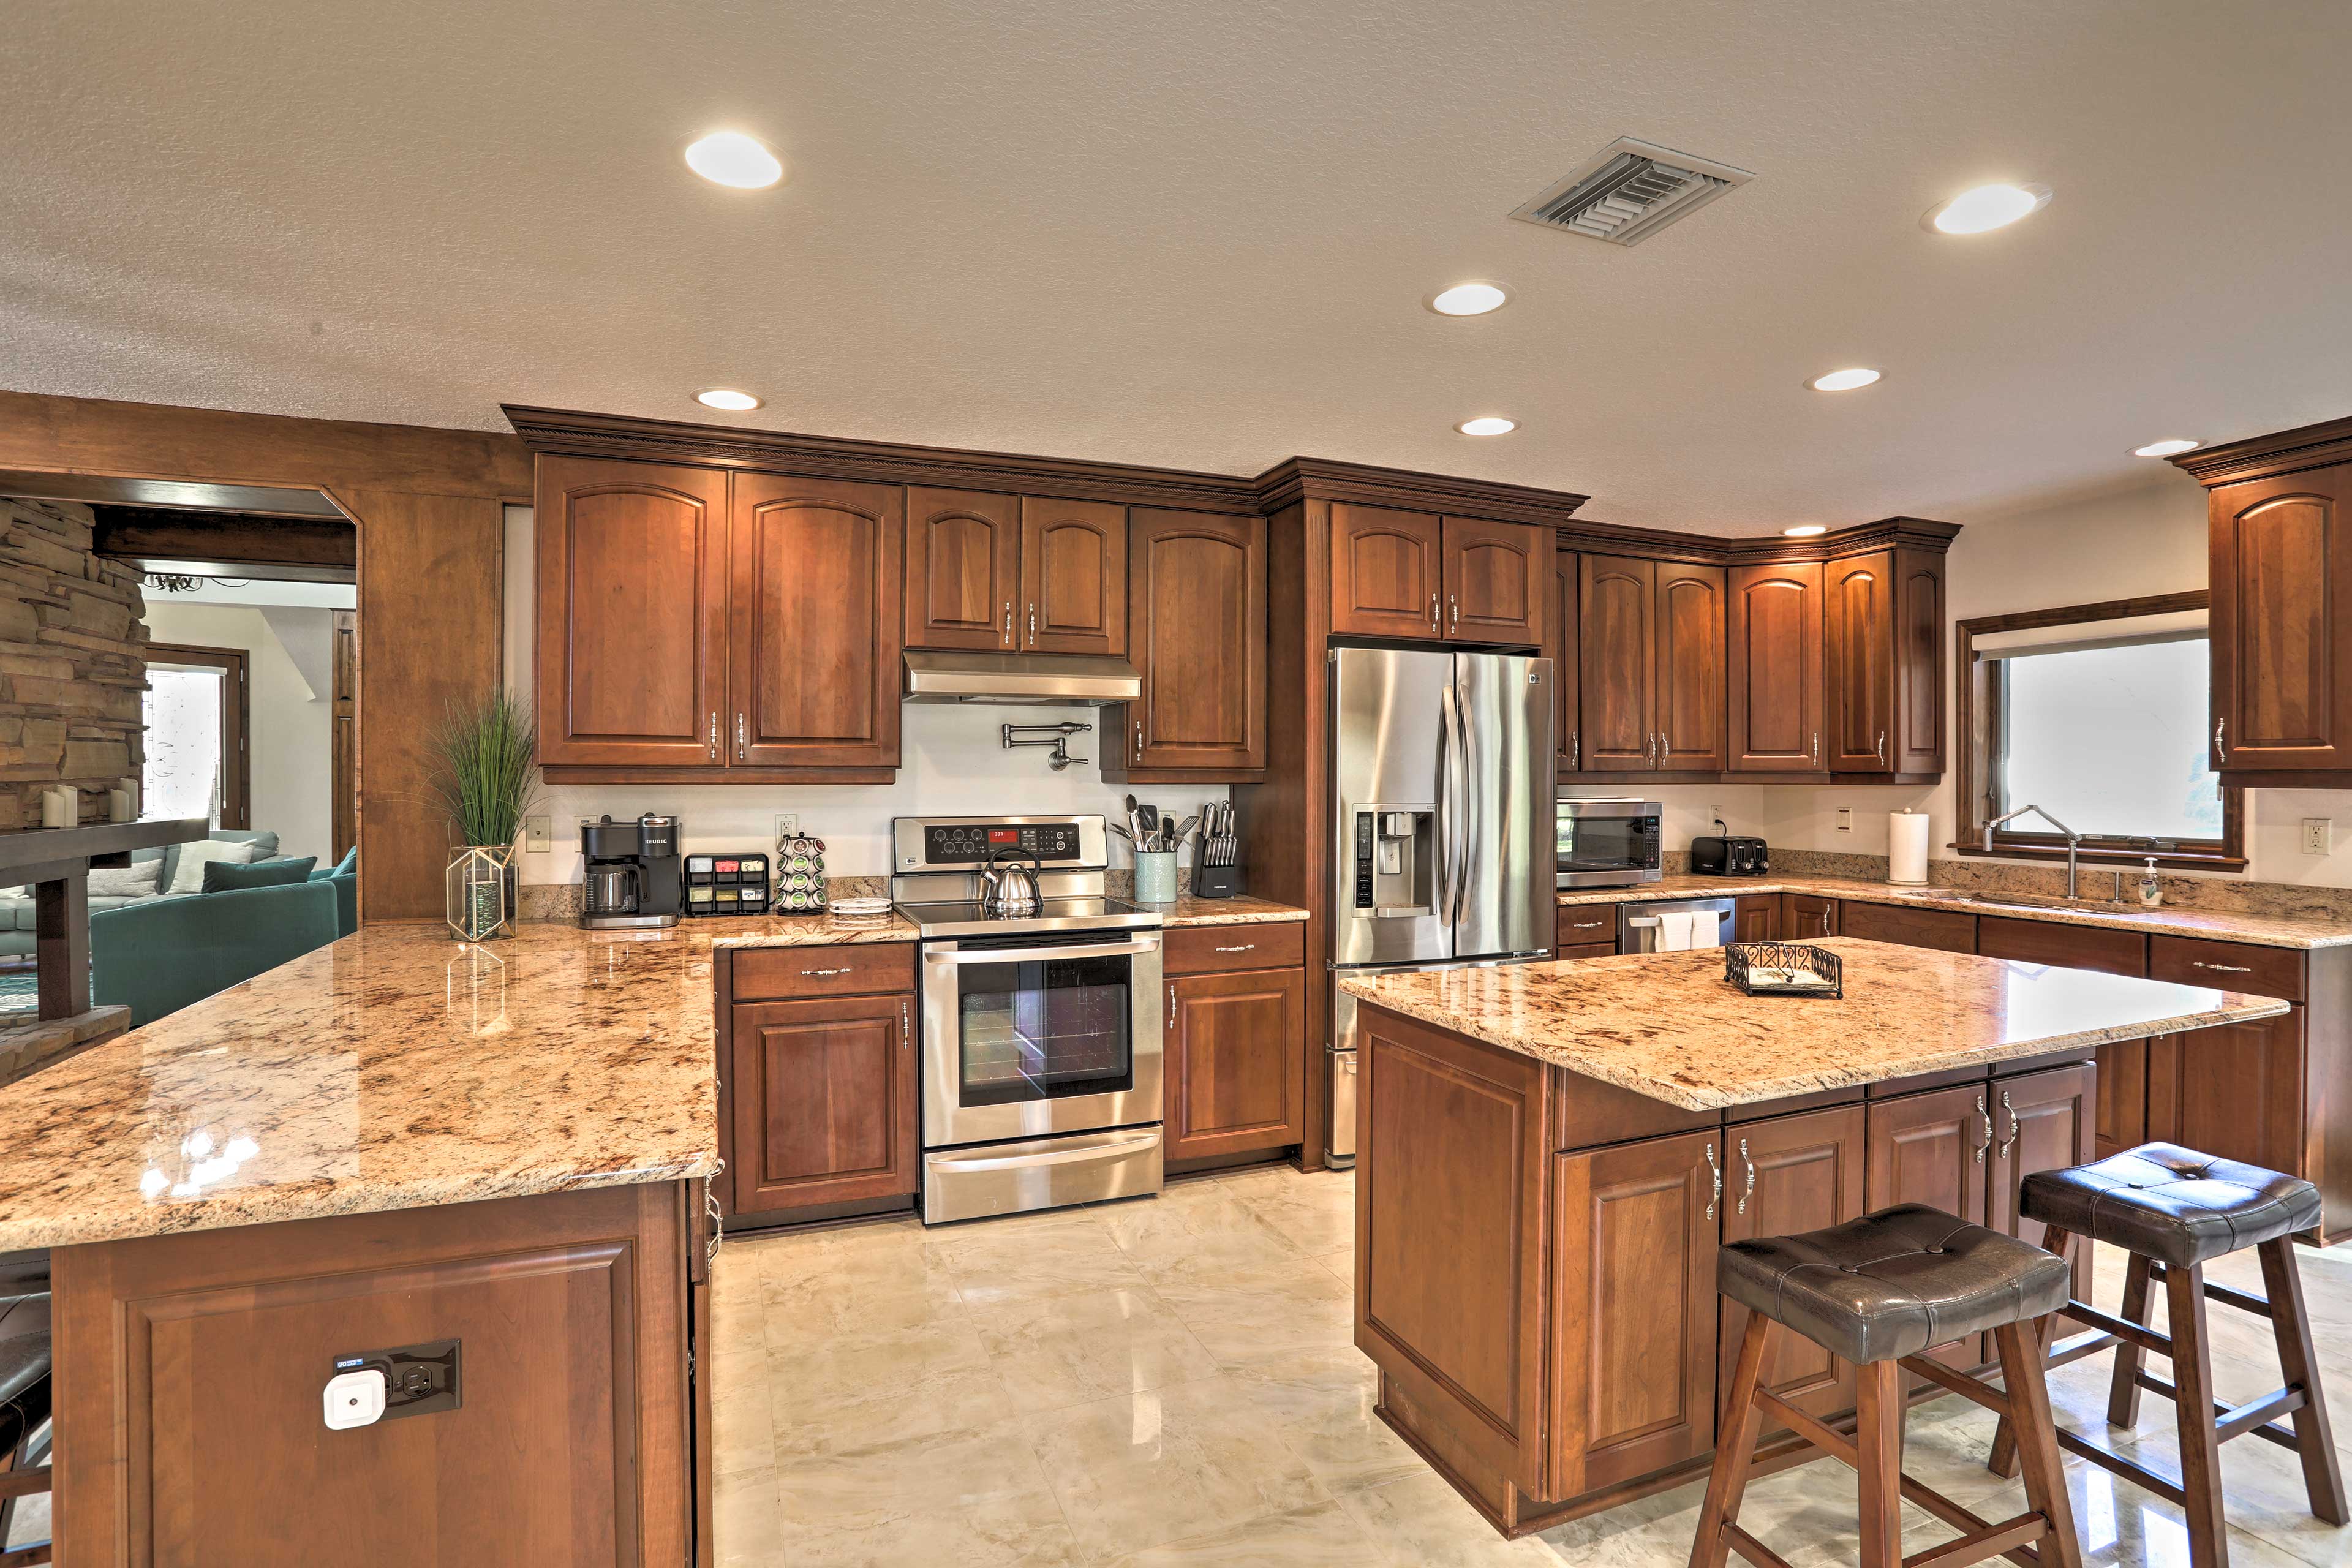 Kitchen | Fully Equipped | Cooking Basics | Breakfast Bar